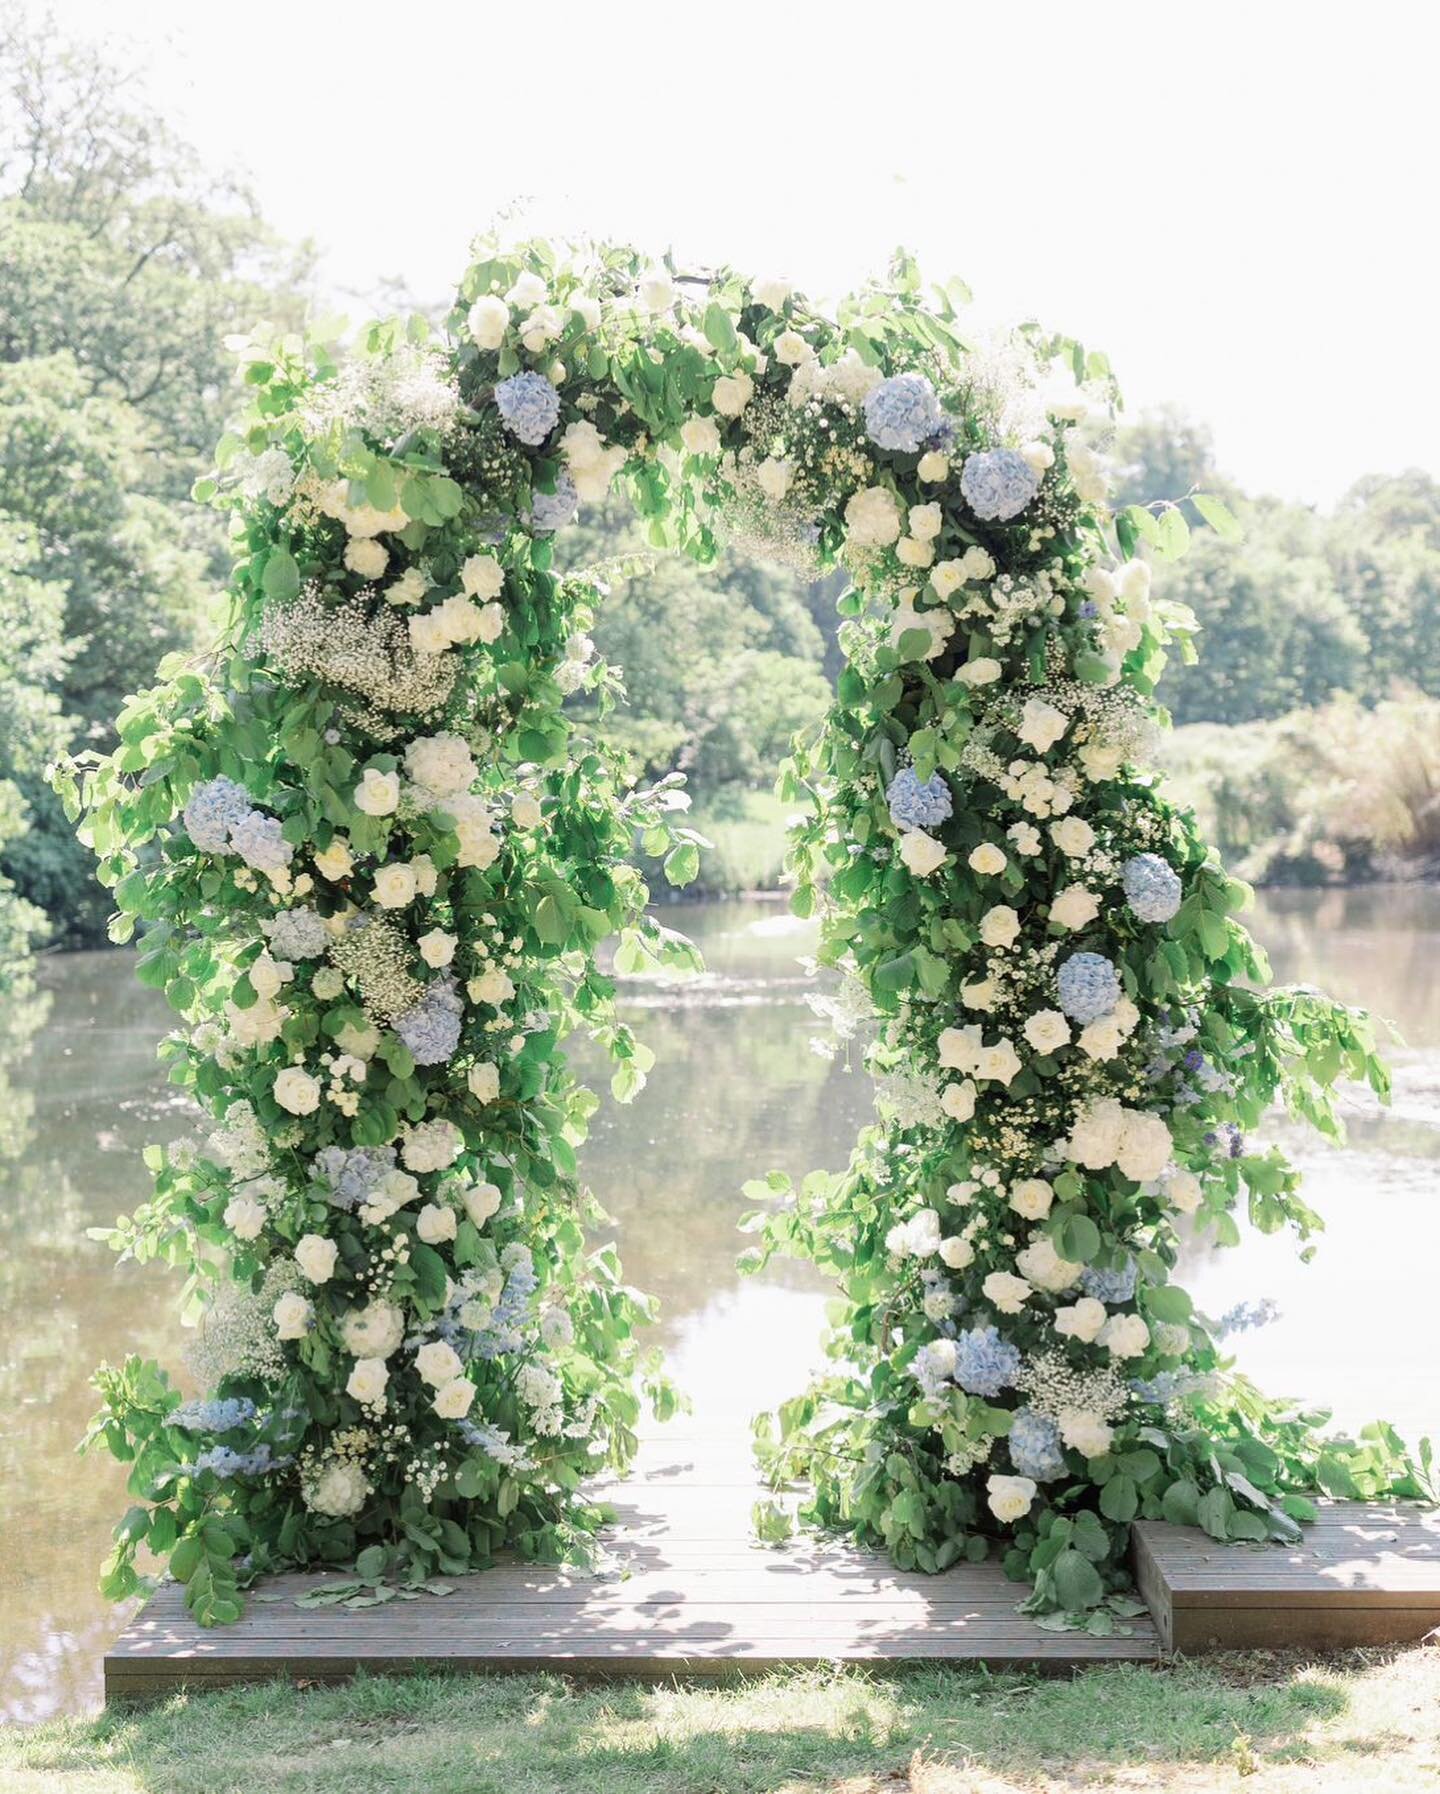 Hundreds of blue and white blooms, an idyllic lakeside and laughter with good friends - the description of a perfect day for a wedding florist. Thank you so much to everyone who helped bring my idea to life, the result is sensational 🤍 Floral design